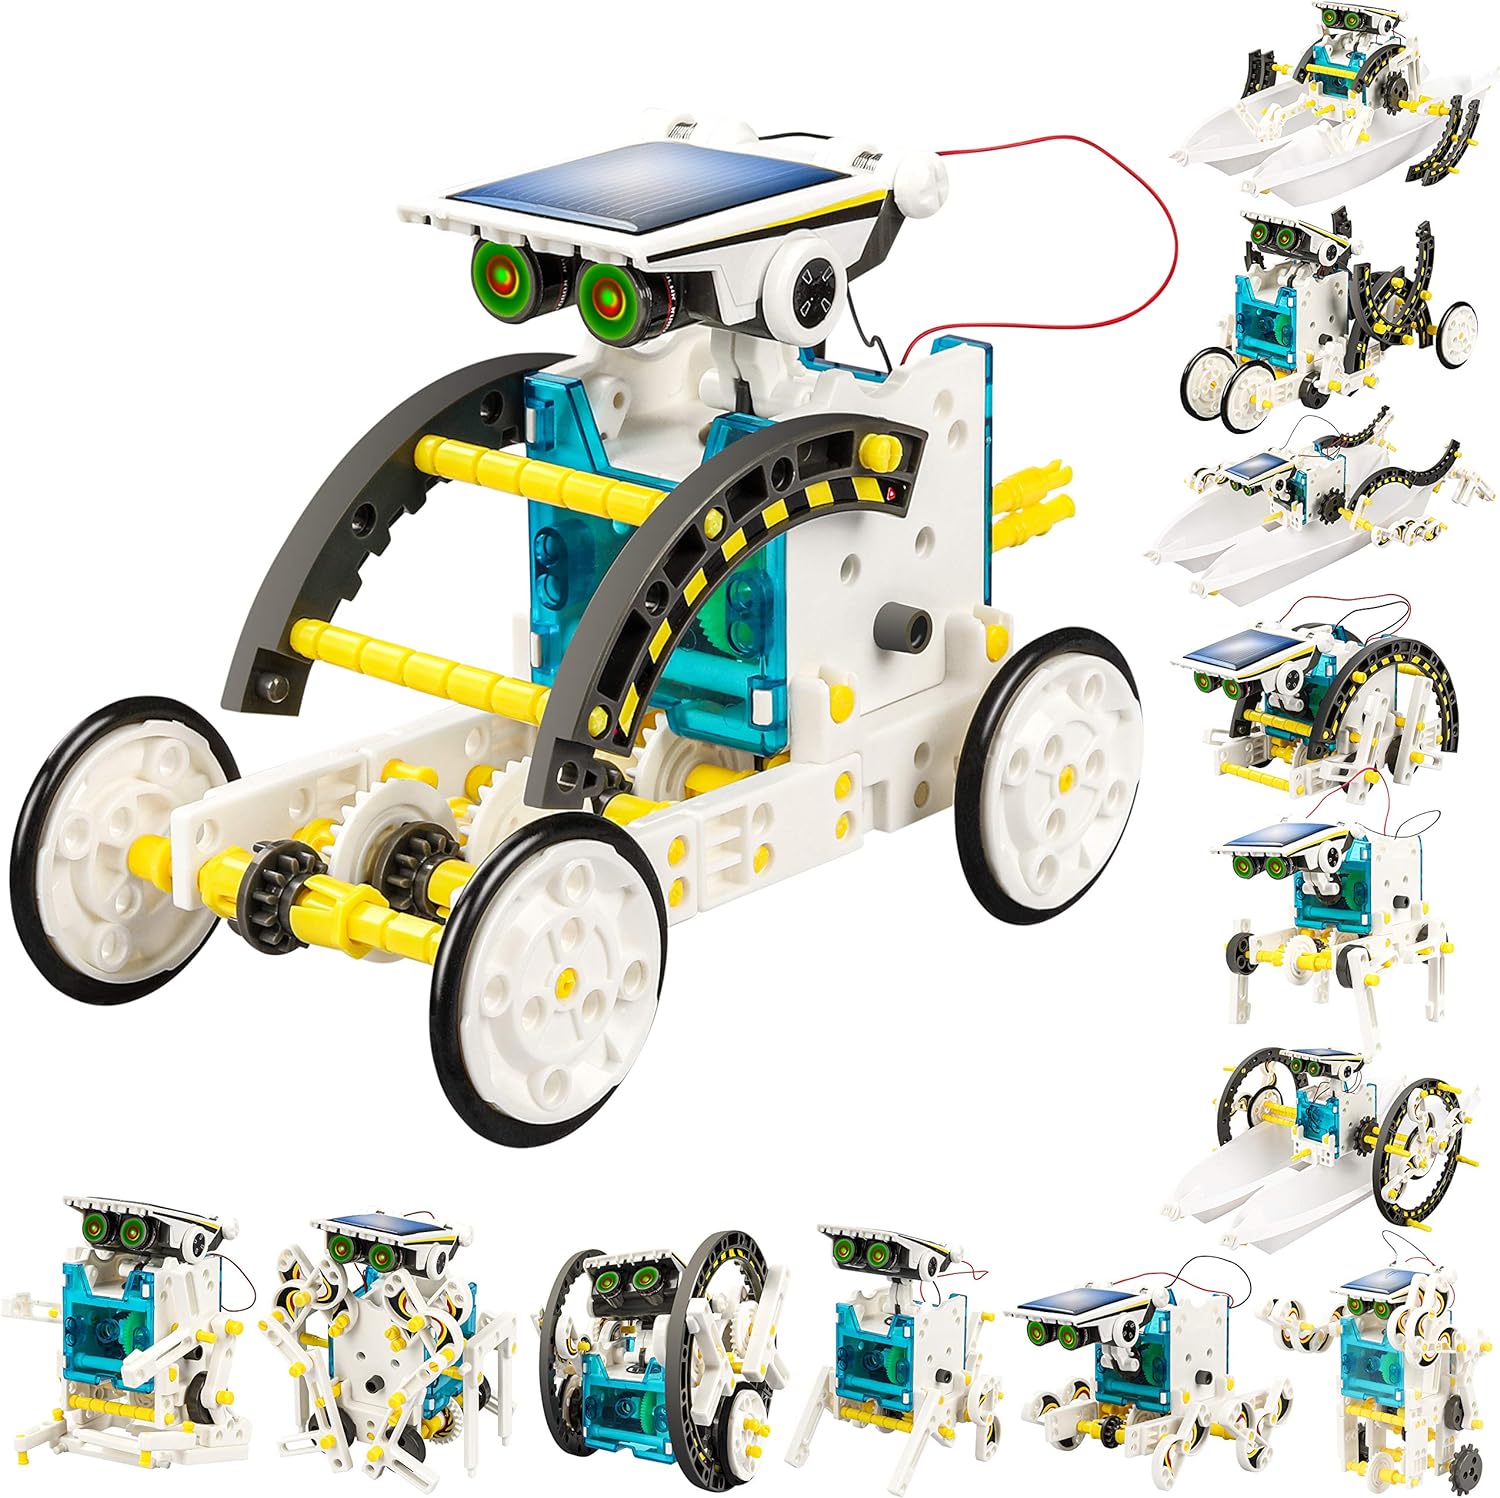 STEM 13-in-1 Solar Power Robots Creation Toy Review